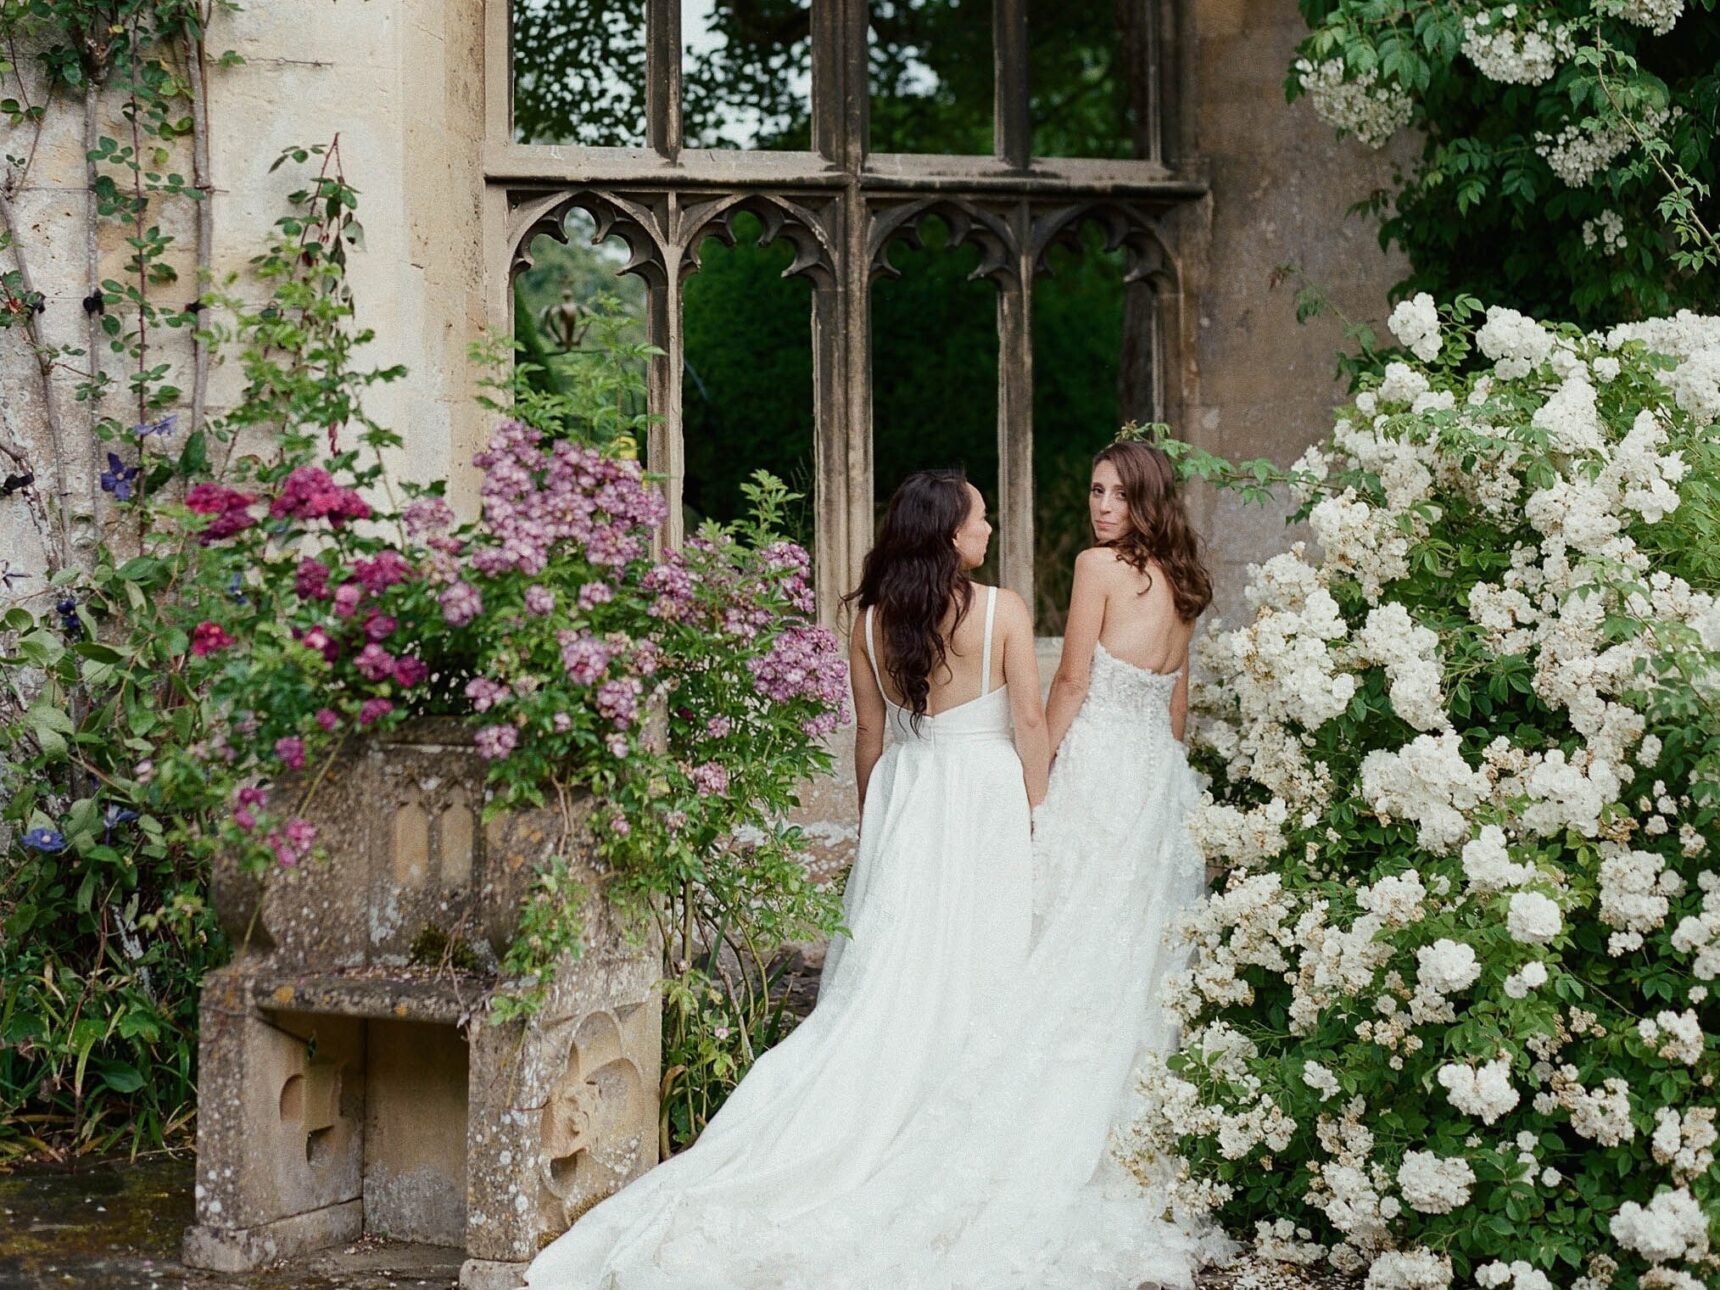 The castle grounds offer many beautiful backdrops for your wedding day photographs